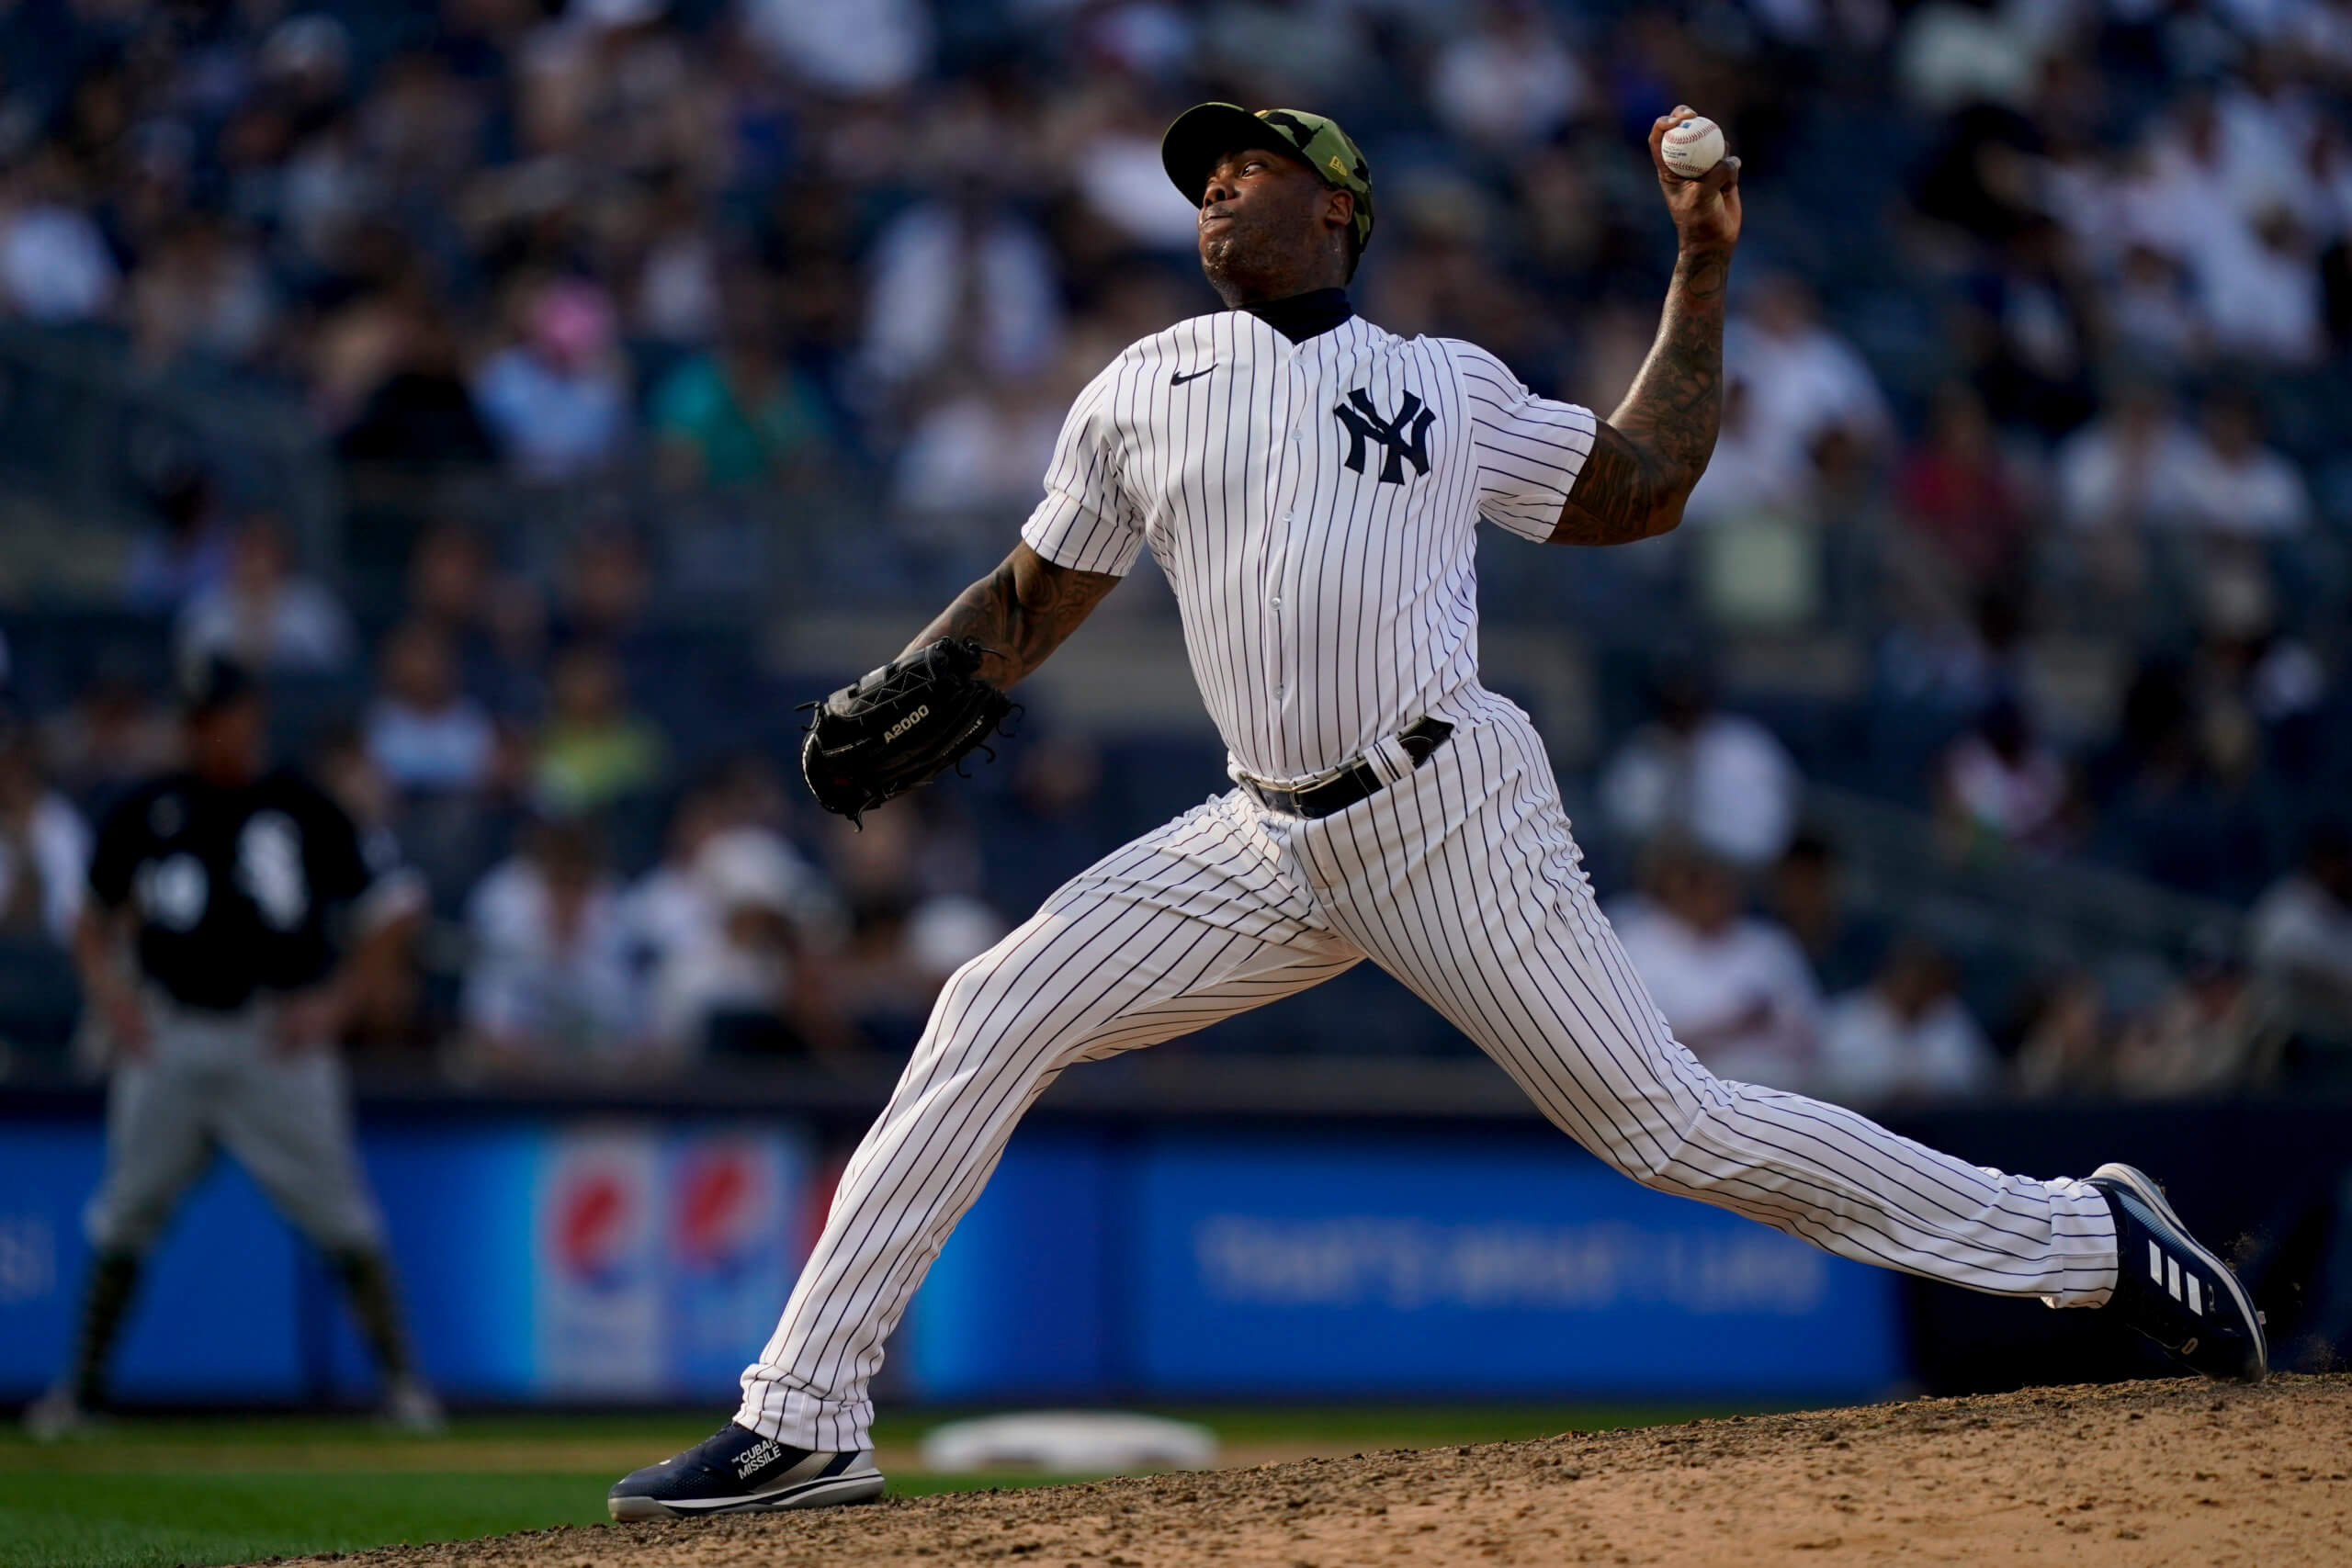 Yankees reliever Aroldis Chapman on IL with infection from tattoo